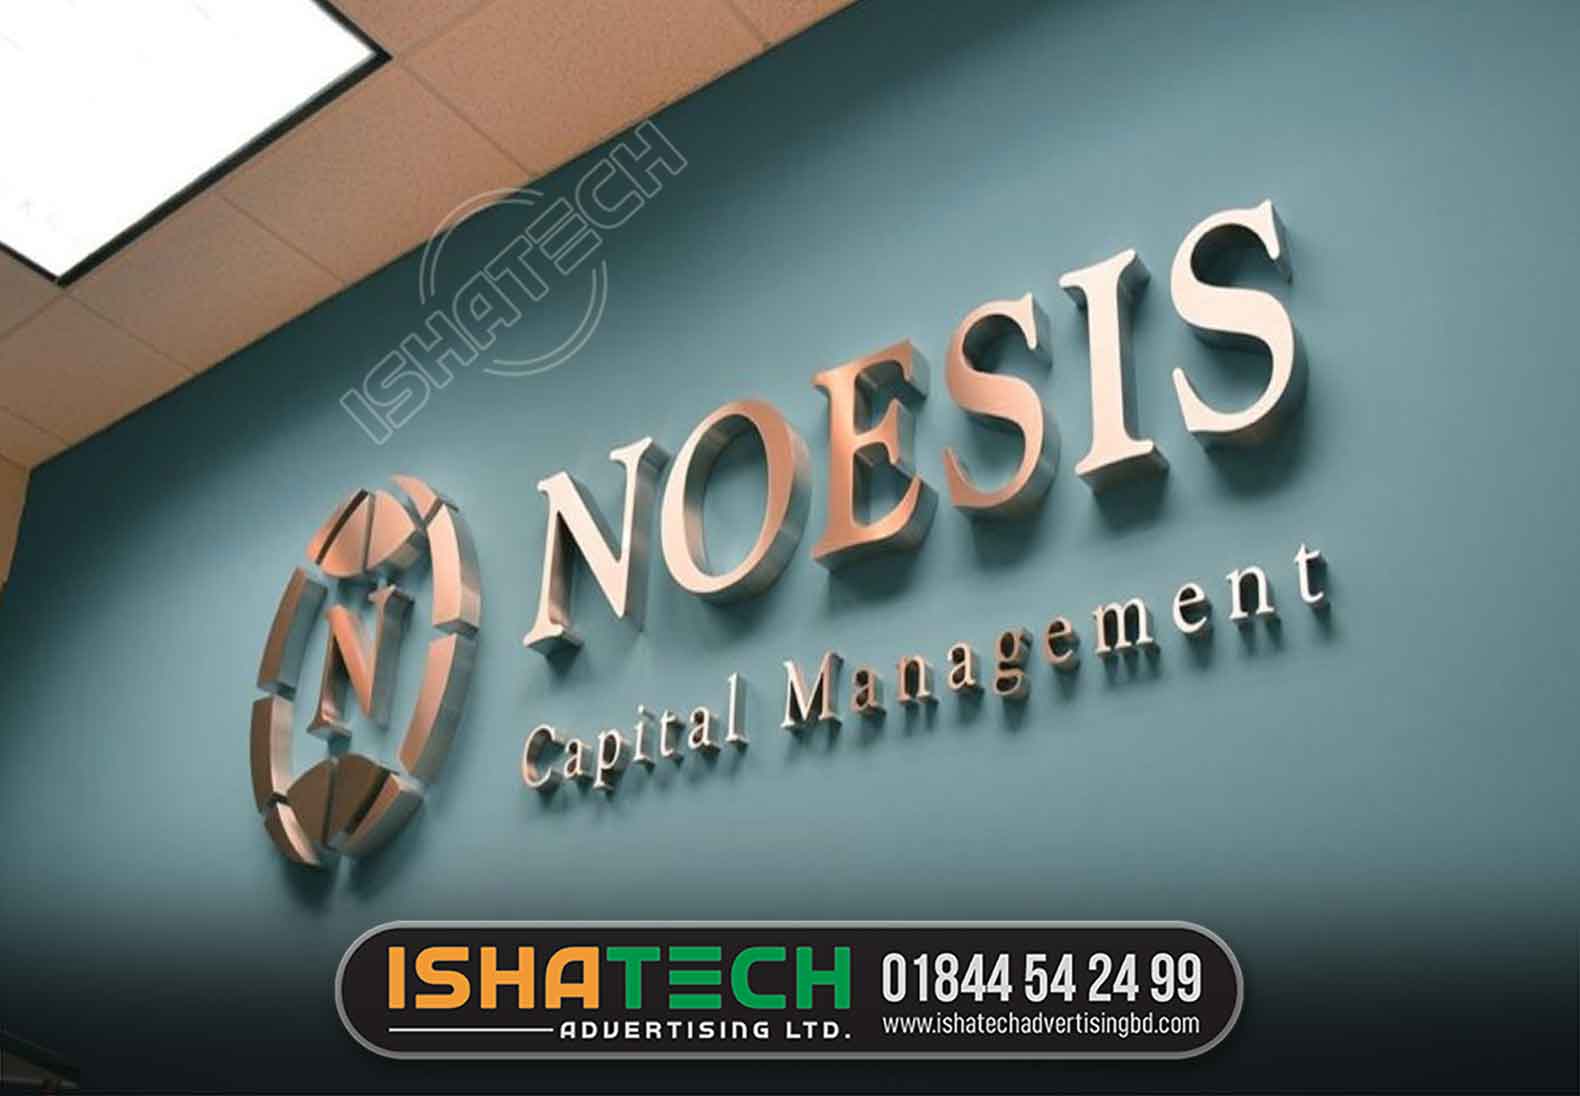 COMPANY SS LOGO SIGNS, Stainless Steel Signs & Logos for Office Lobby, Stainless Steel Logo Custom Fabricated Metal Sign Maker